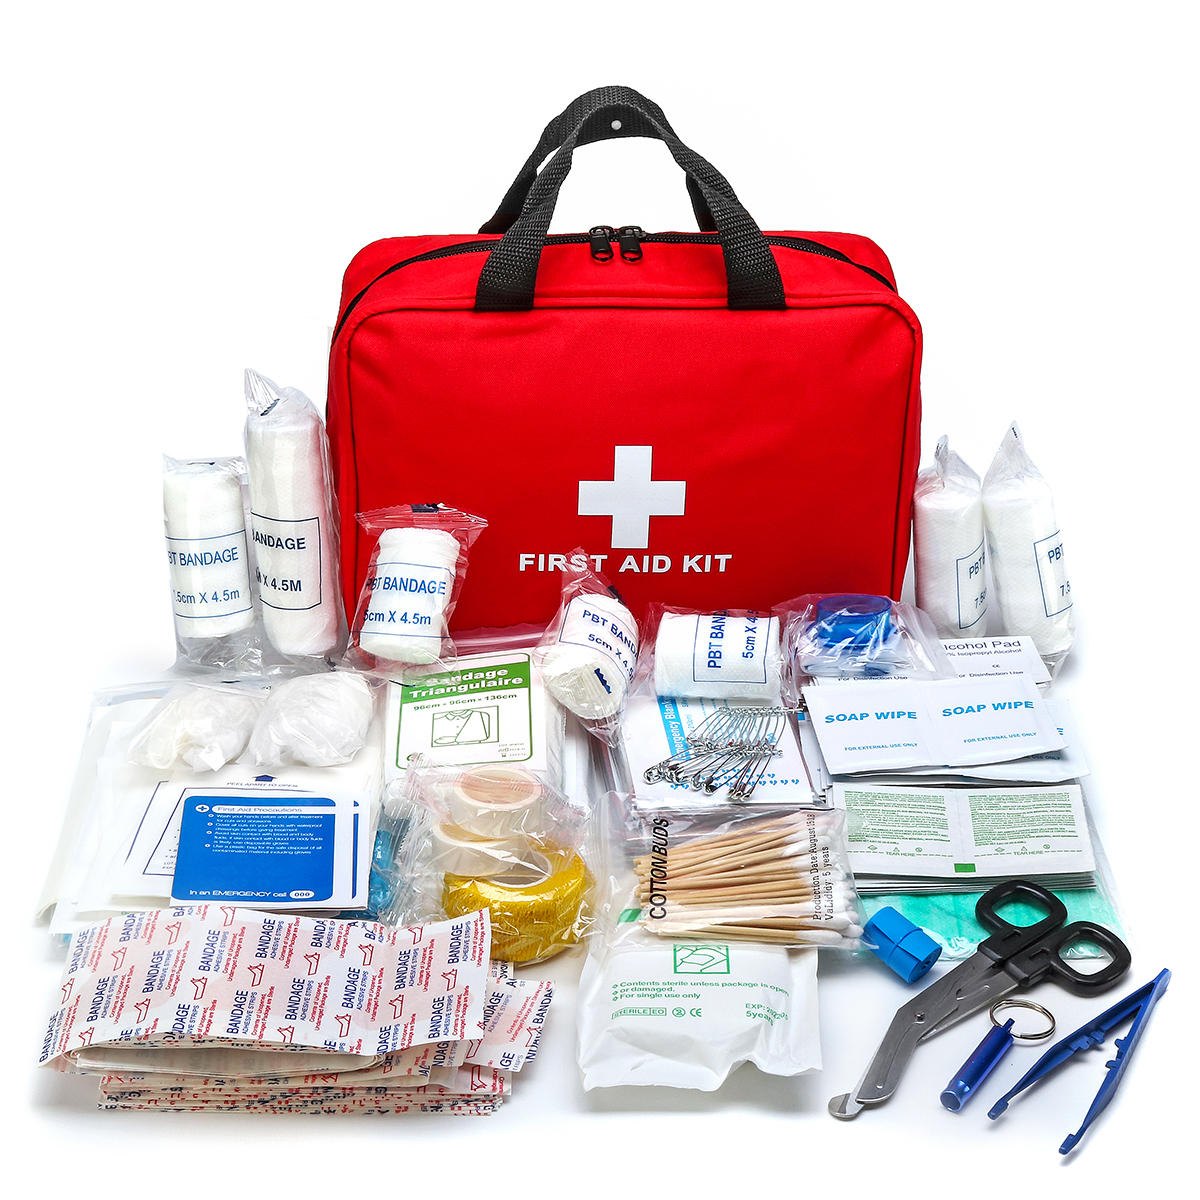 SAIFEE INDUSTRIAL SOLUTIONS +9194489 50021 - Service - First Aid Kit